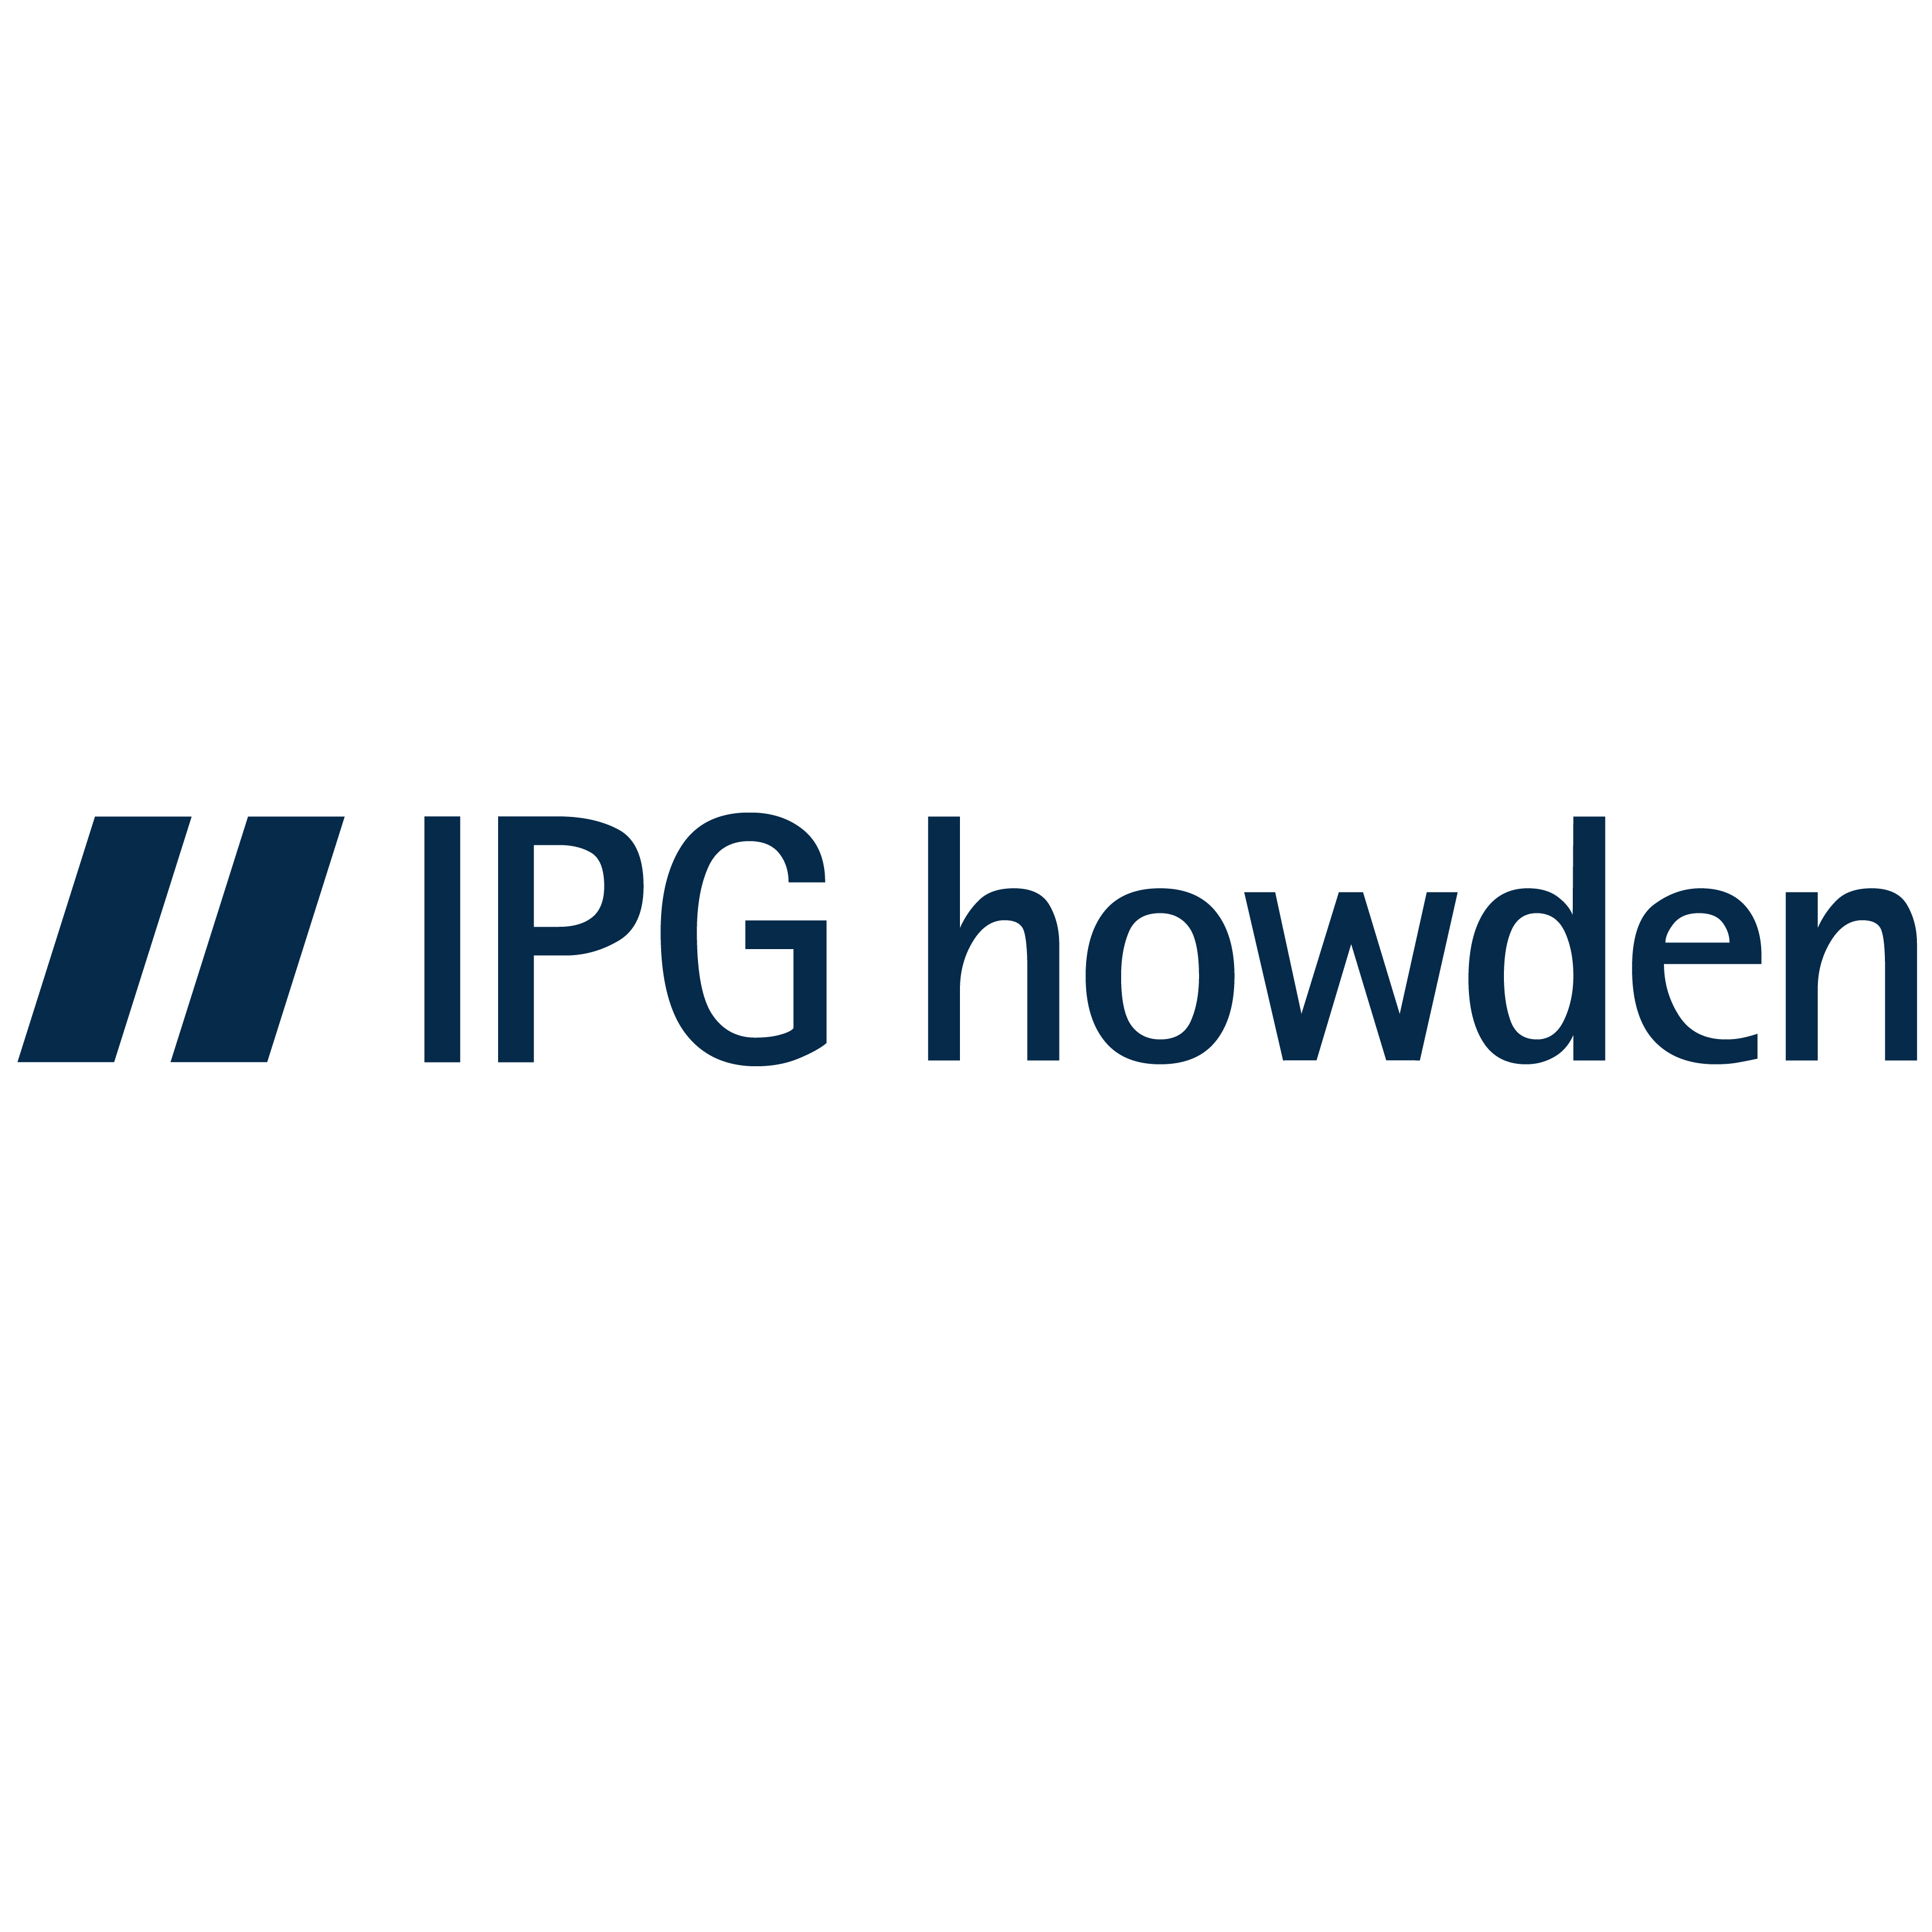 IPG howden